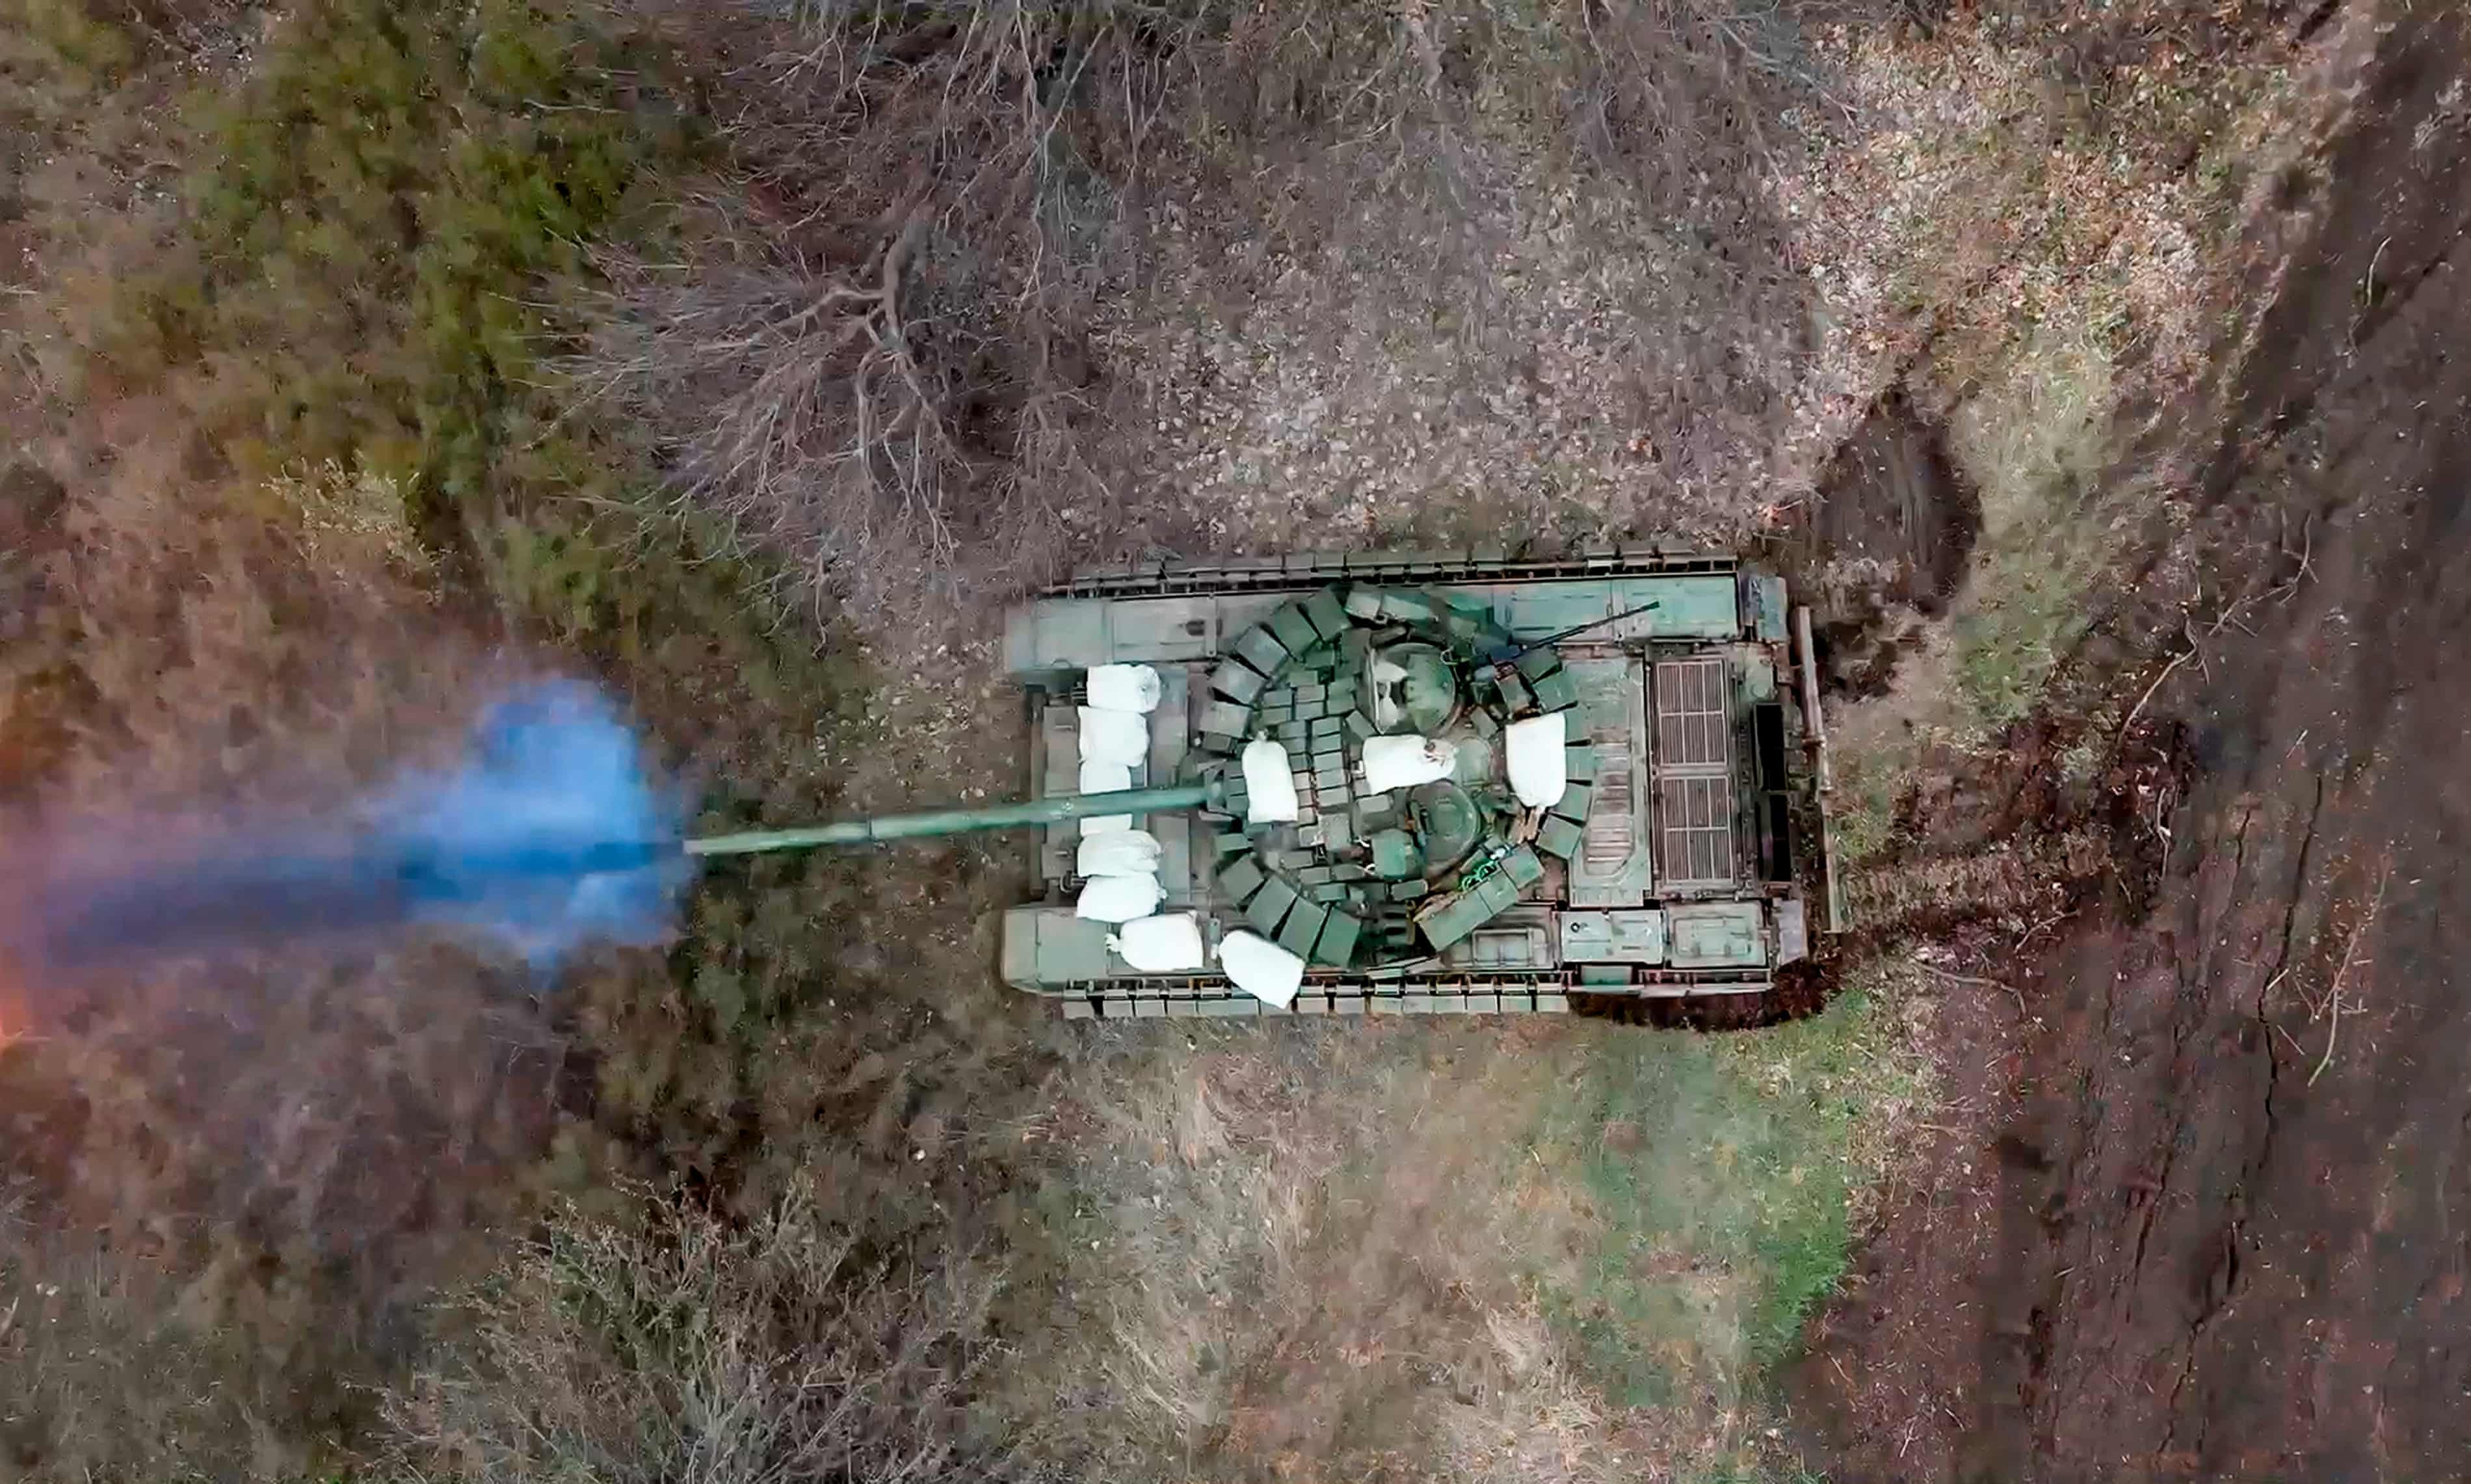 Moscow has hit Ukraine with almost 900 guided bombs in March, Zelenskiy says (theguardian.com)